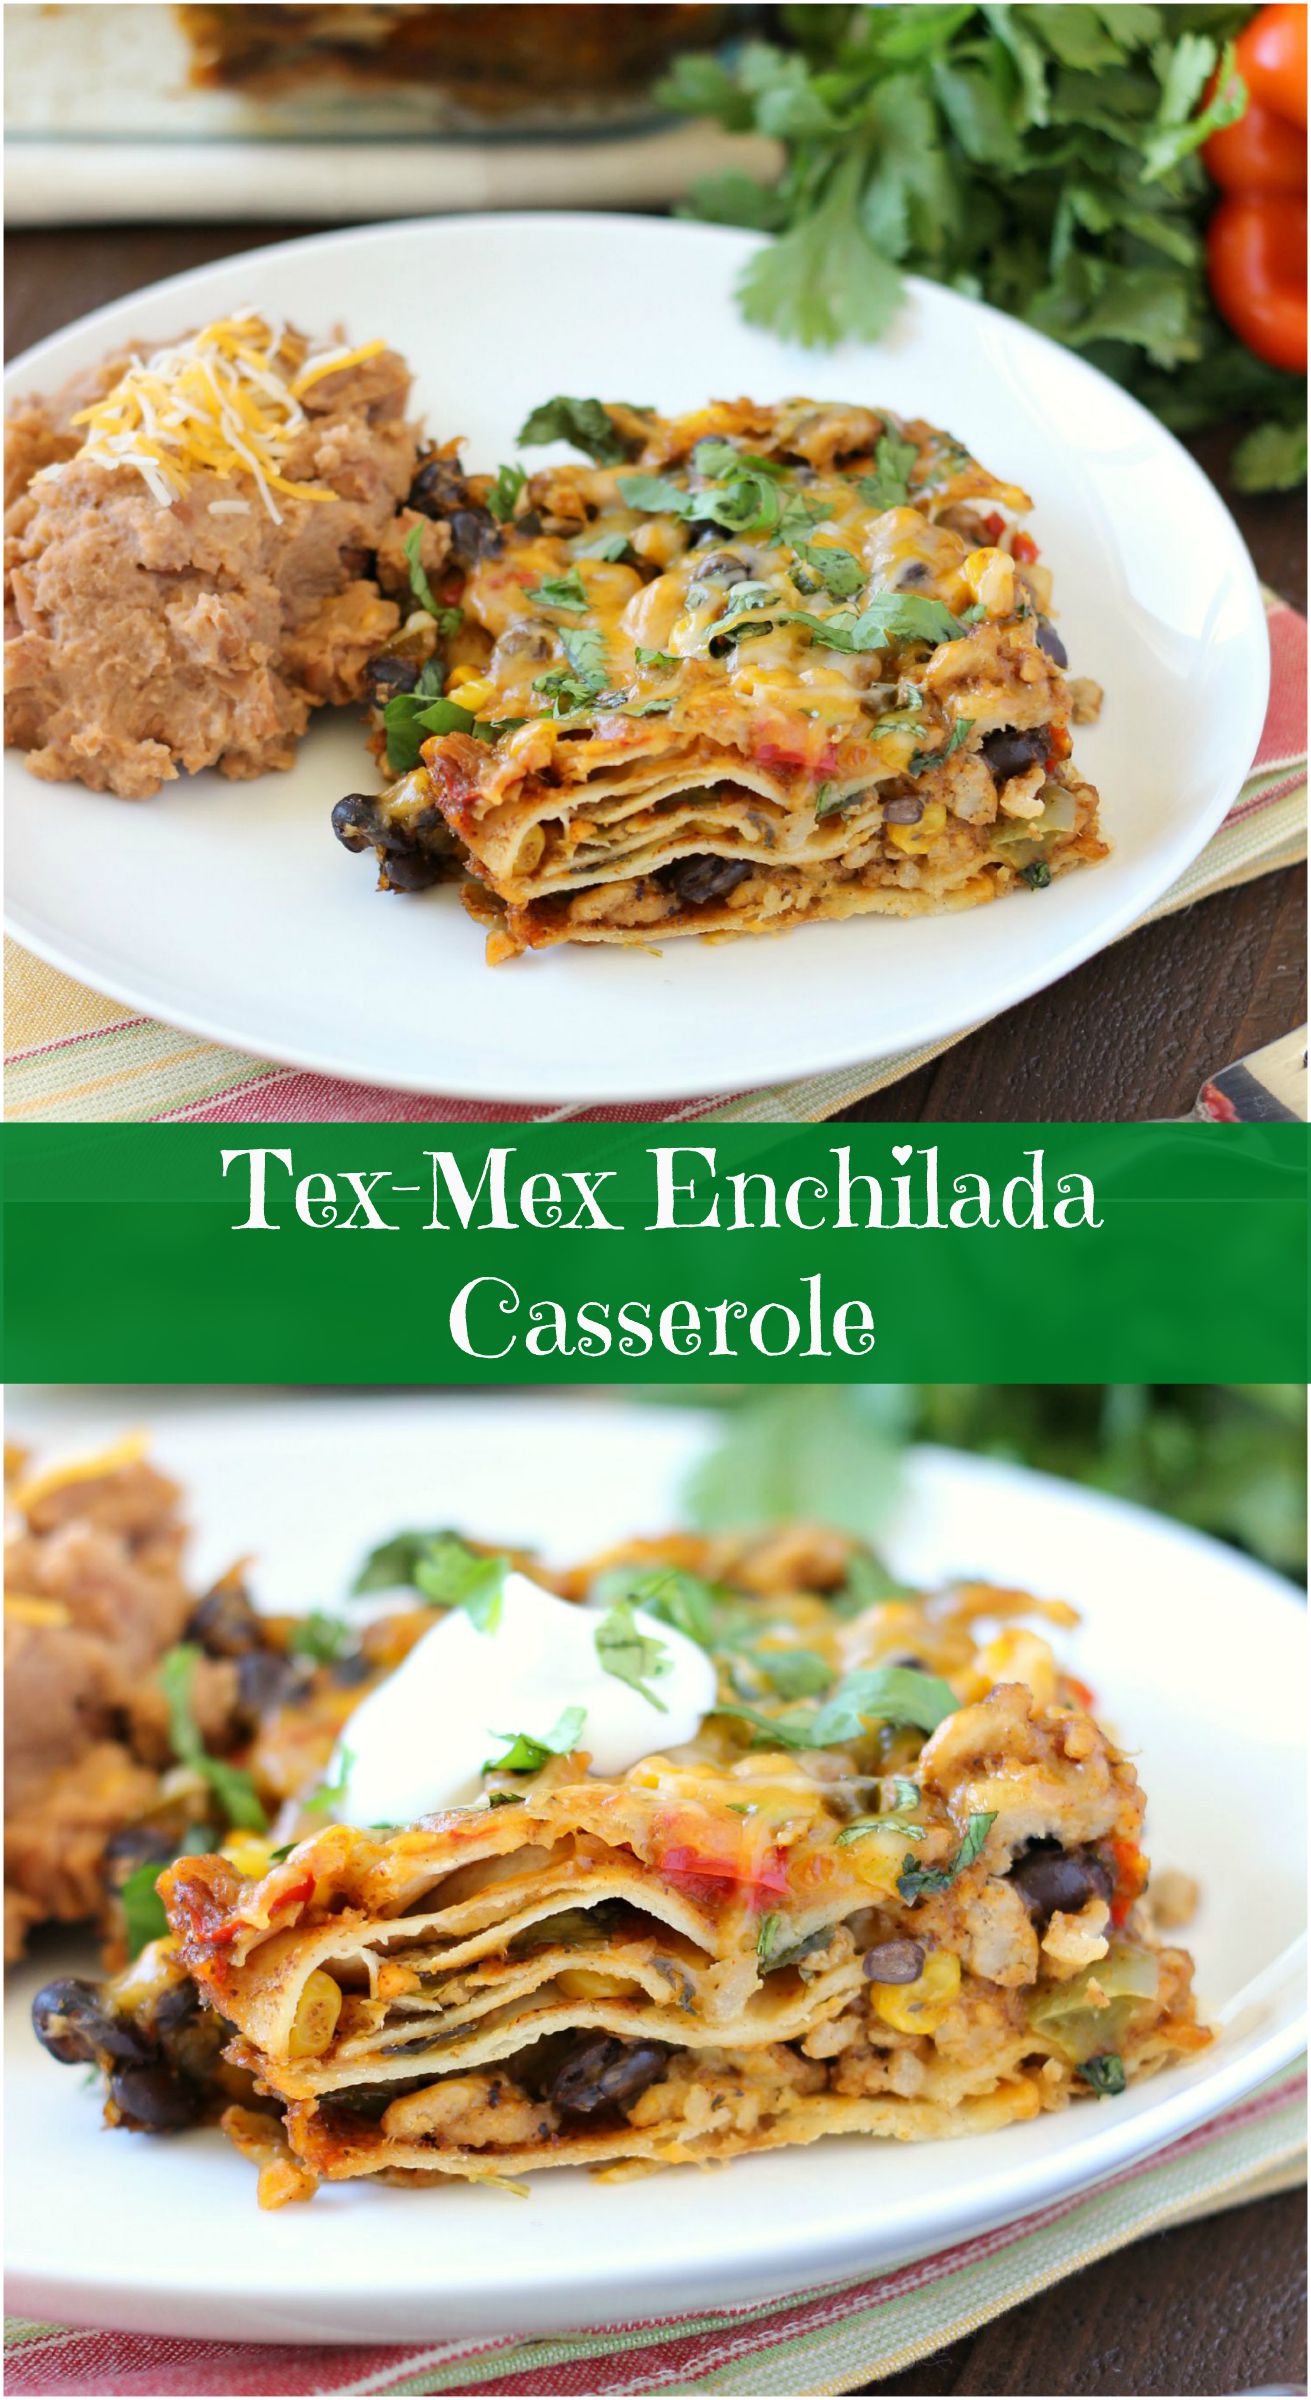 Tex-Mex Enchilada Casserole ~ mykitchencraze.com ~ This casserole is filled with corn, black beans, peppers and a delicious homemade enchilada sauce! Delicious!!